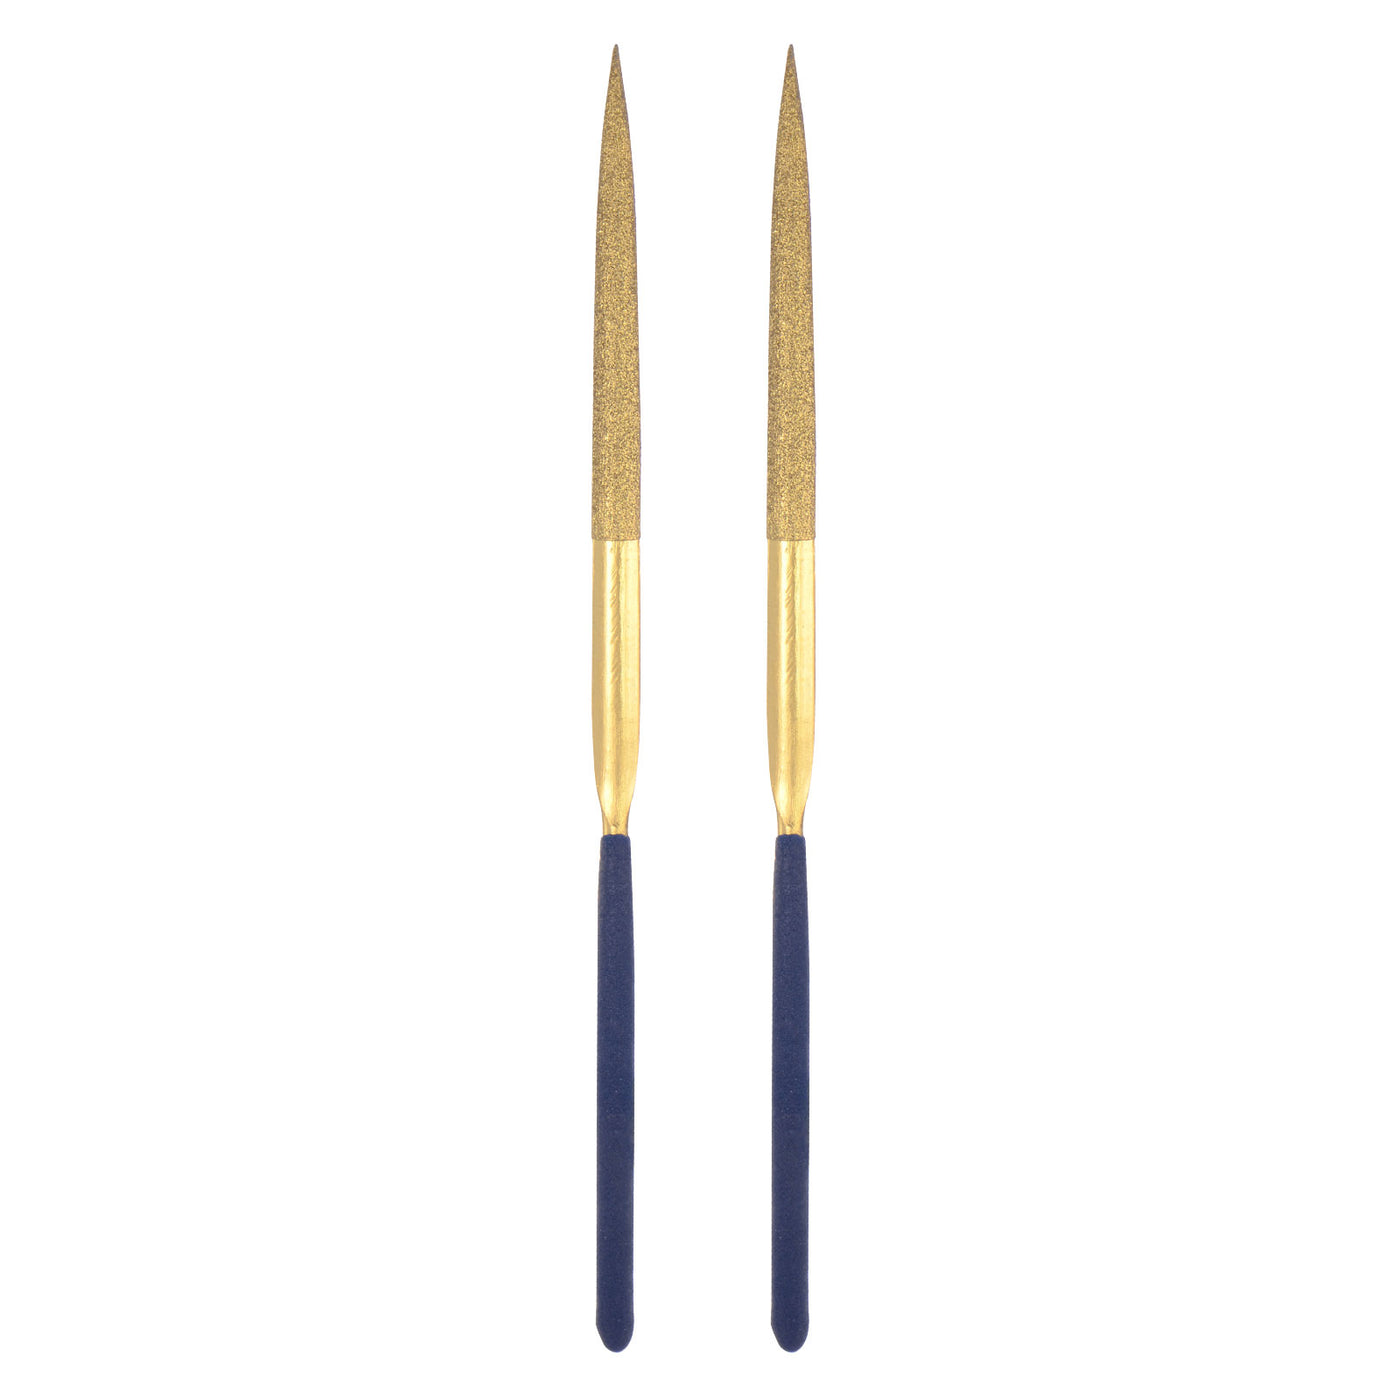 Uxcell Uxcell 5mm x 180mm Titanium Coated Half Round Diamond Needle Files with TPU Handle 2pcs